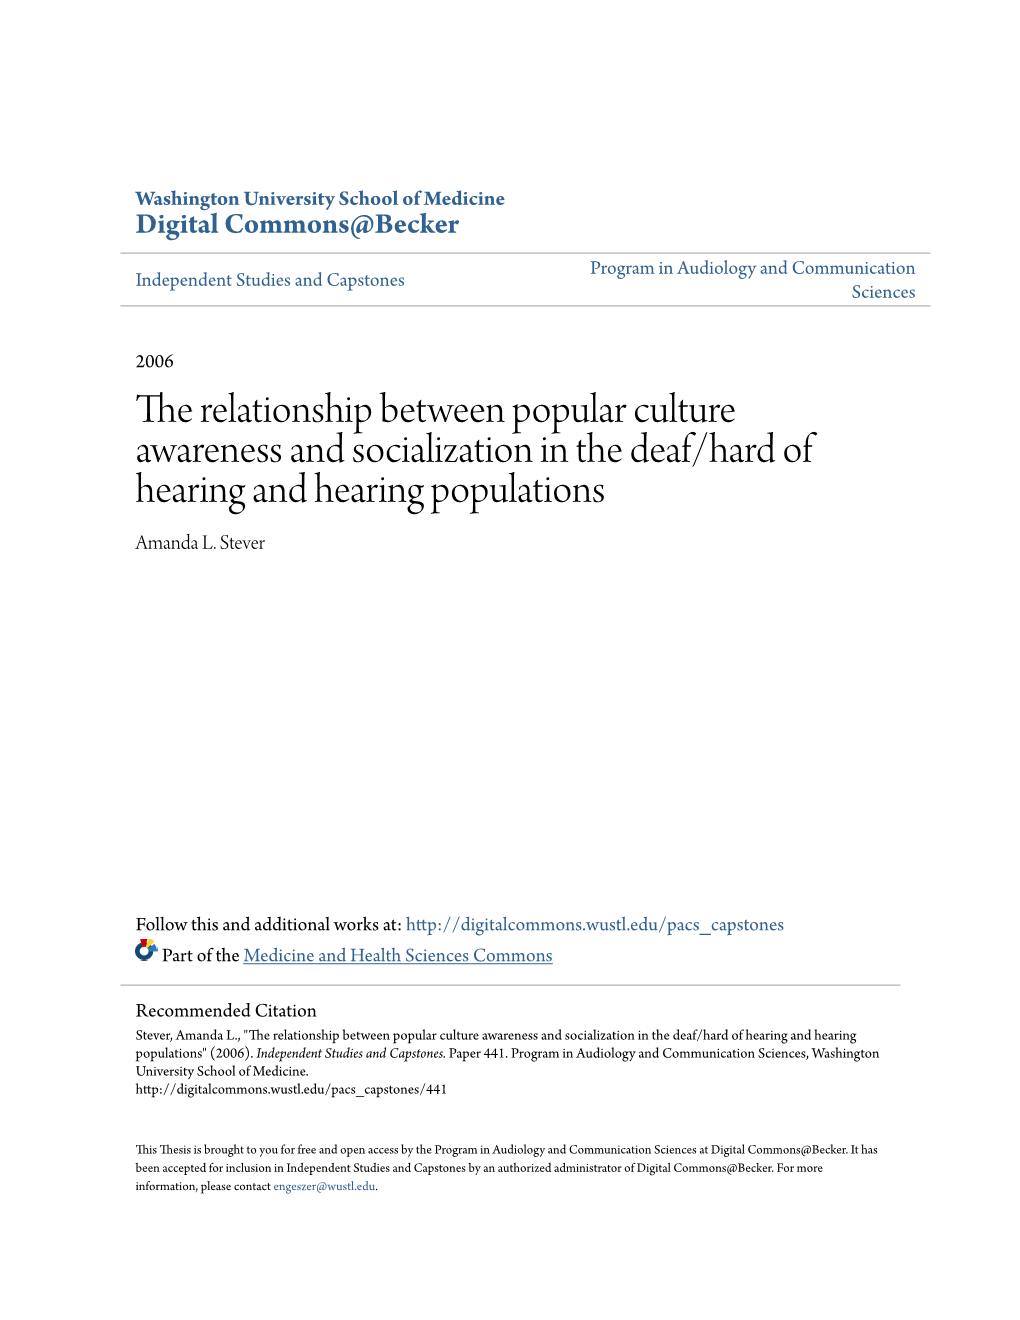 The Relationship Between Popular Culture Awareness and Socialization in the Deaf/Hard of Hearing and Hearing Populations